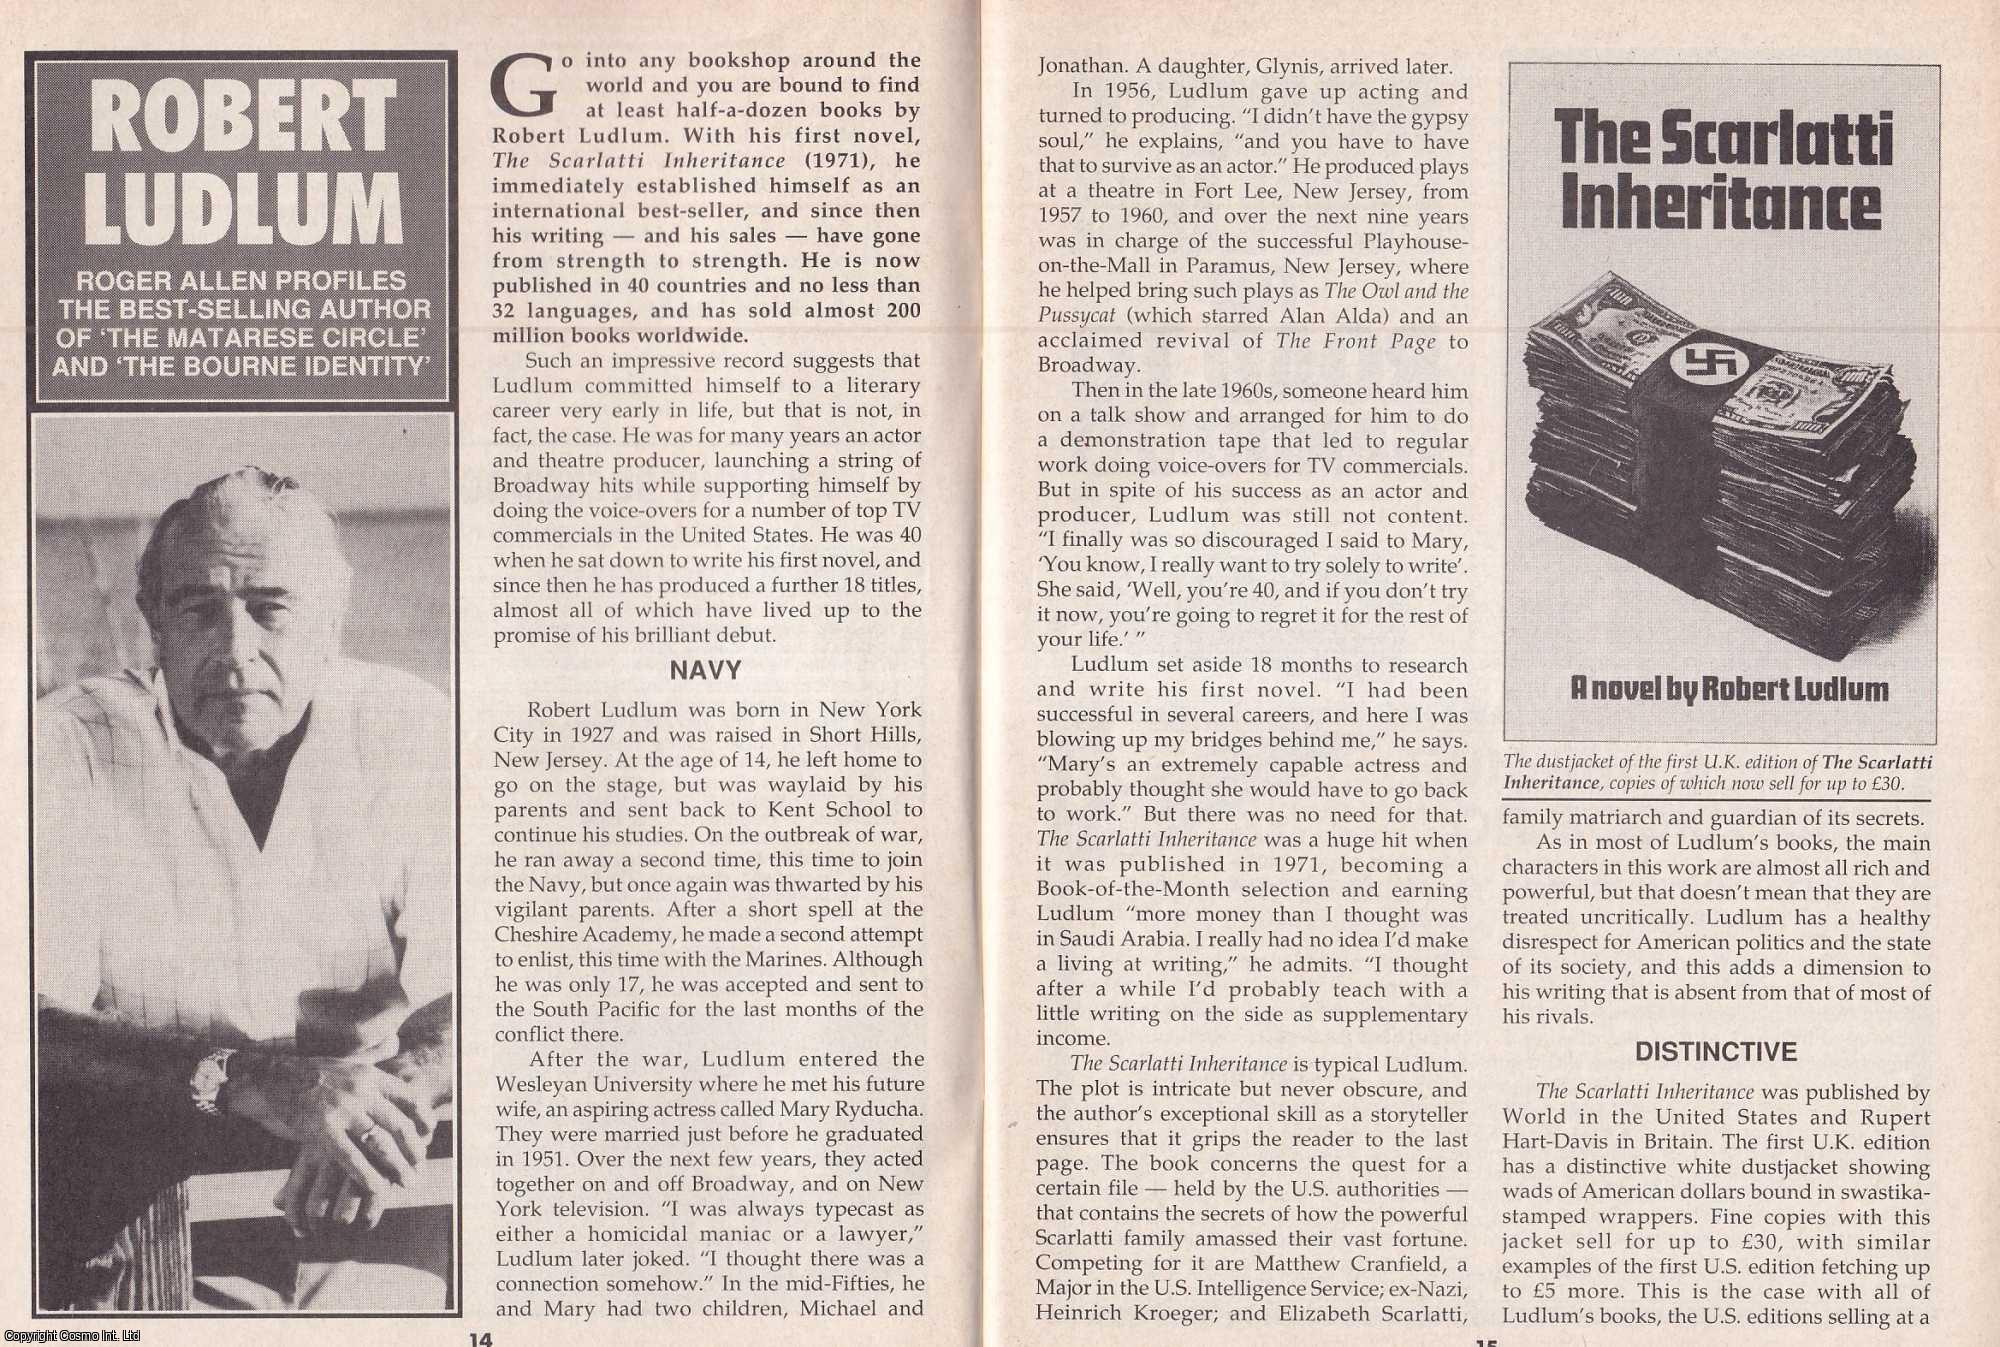 Roger Allen - Robert Ludlum. Profiling The Best Selling Author. This is an original article separated from an issue of The Book & Magazine Collector publication.